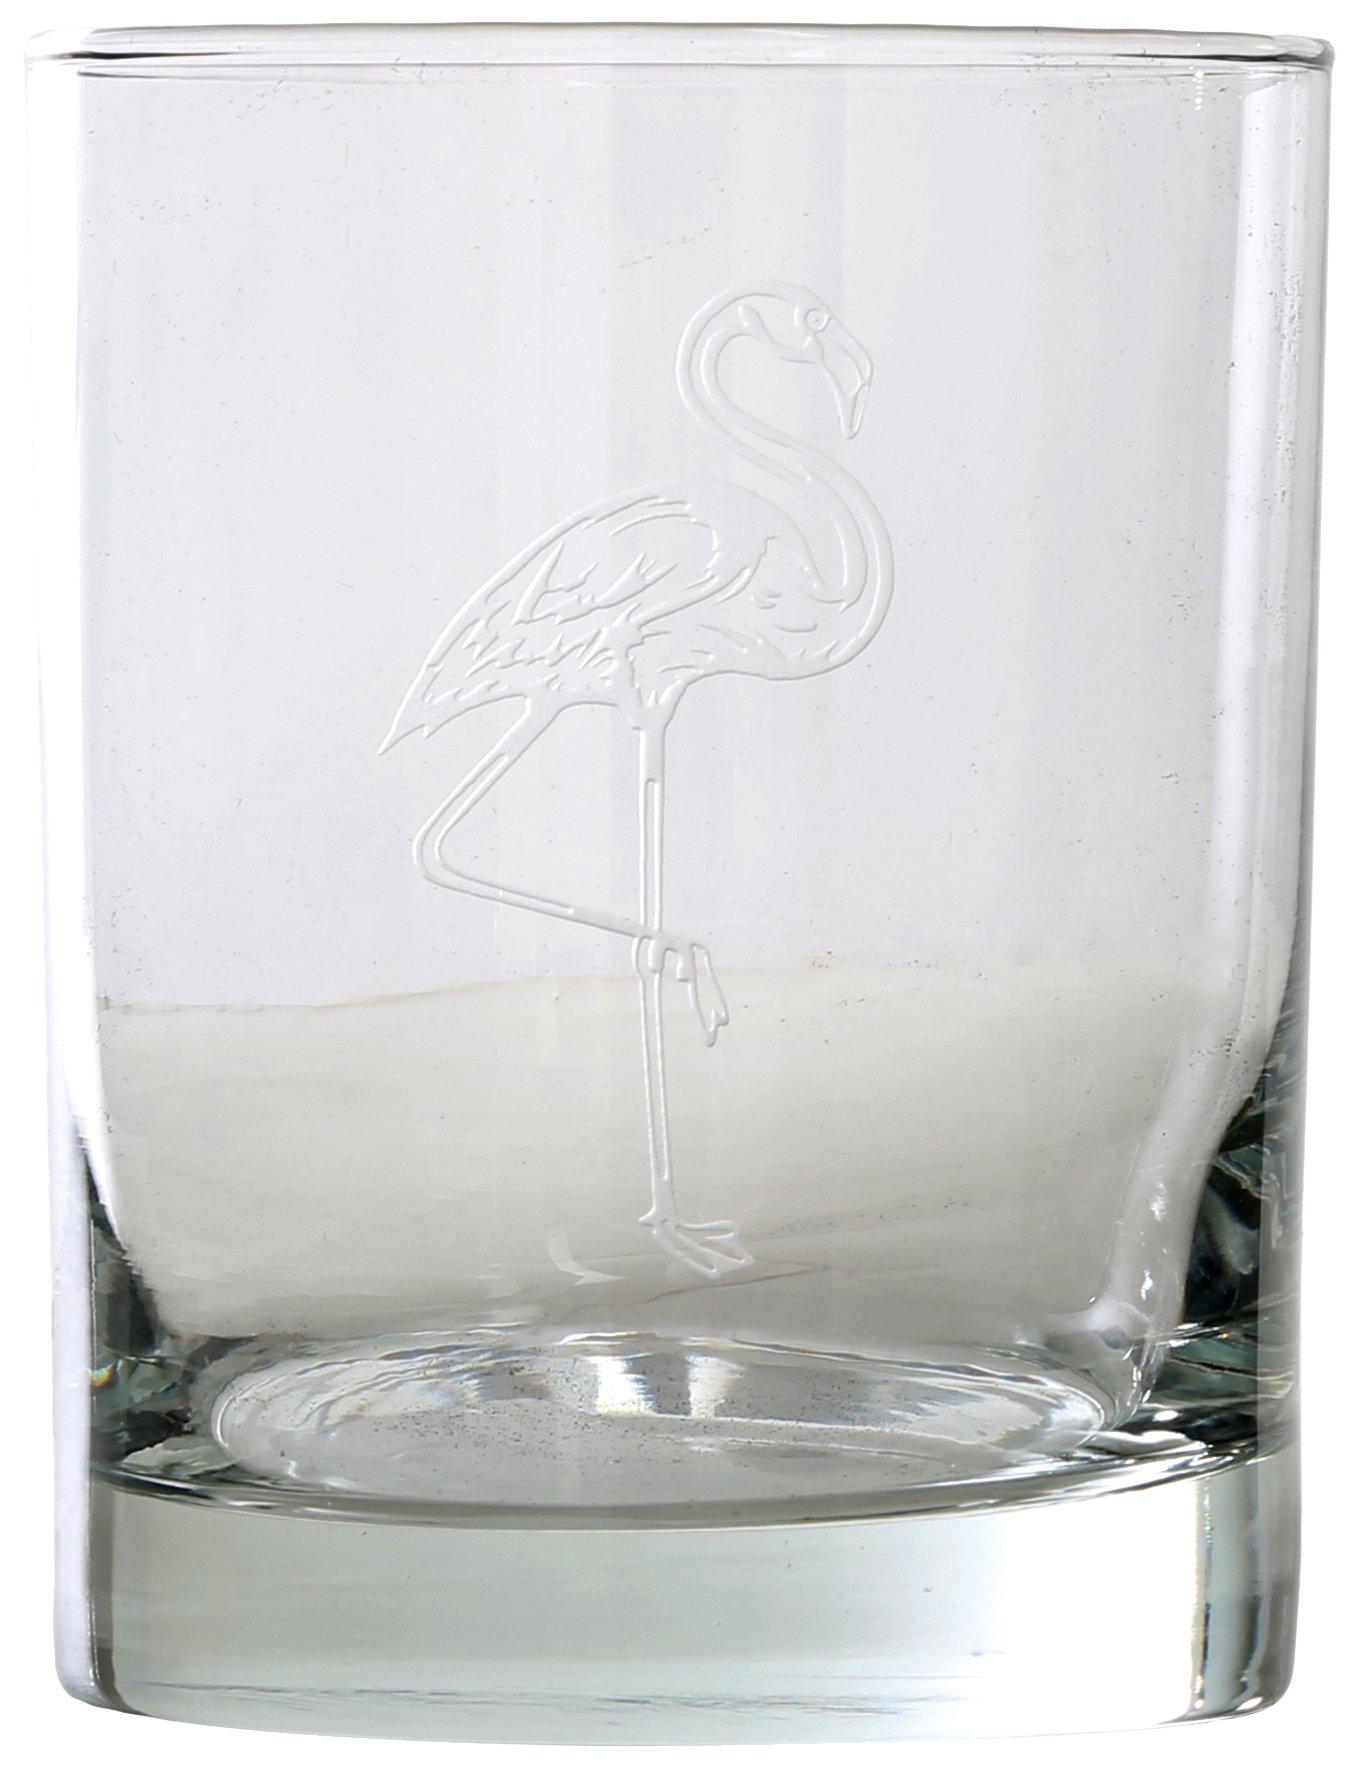 14 Oz Double Old Fashions Glass